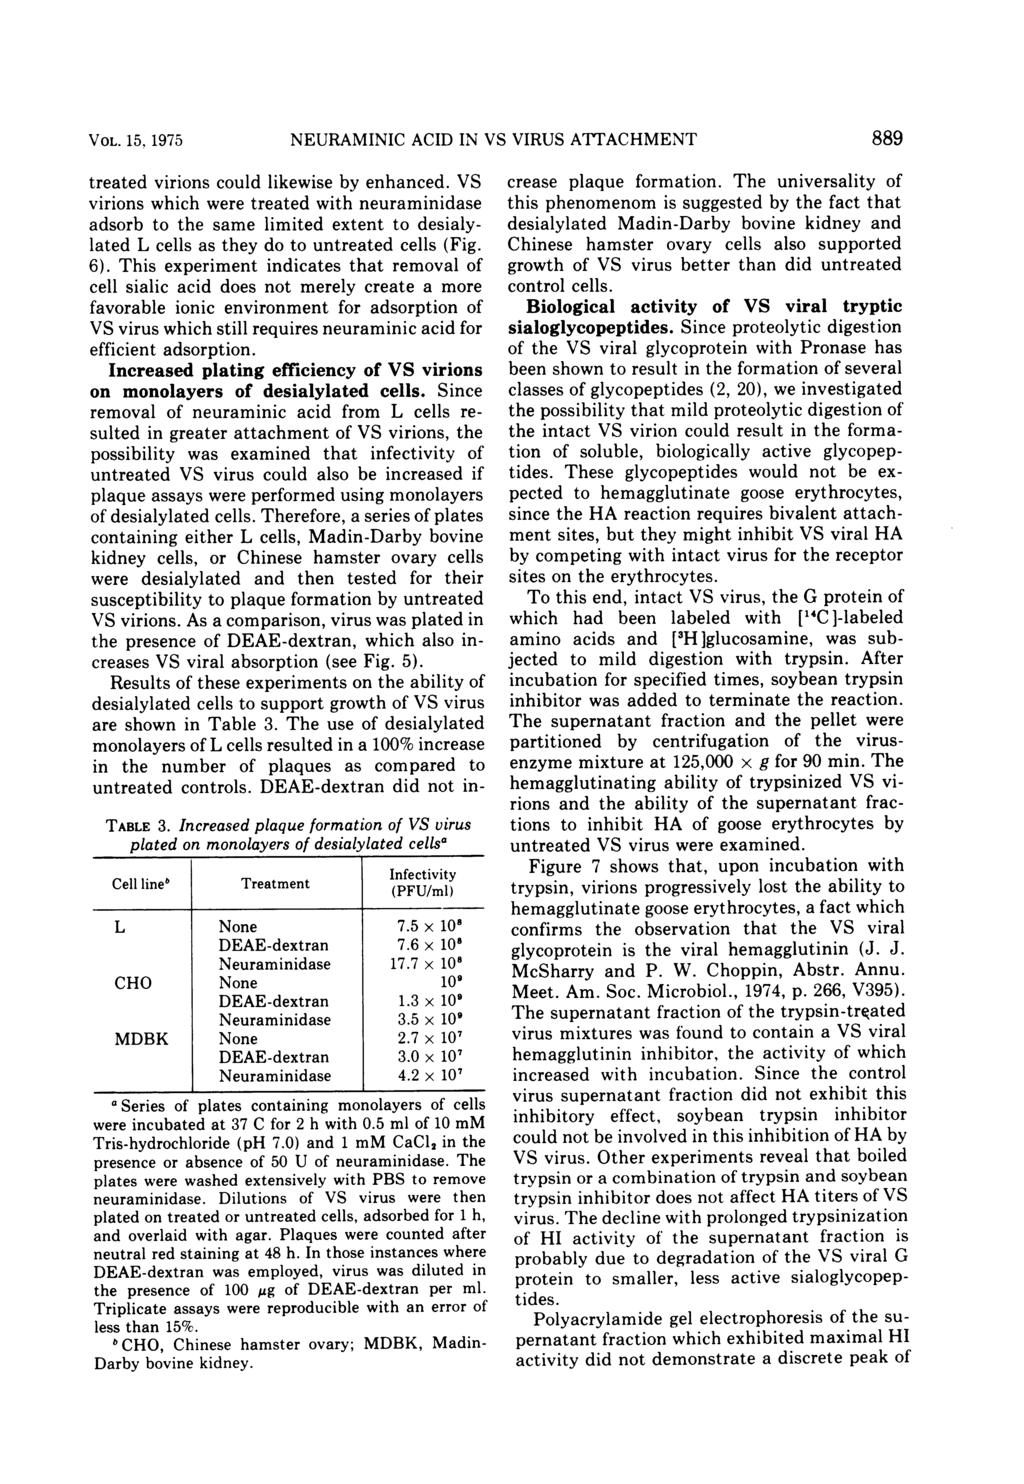 VOL. 15, 1975 NEURAMINIC ACID IN VS VIRUS AYTACHMENT treated virions could likewise by enhanced.